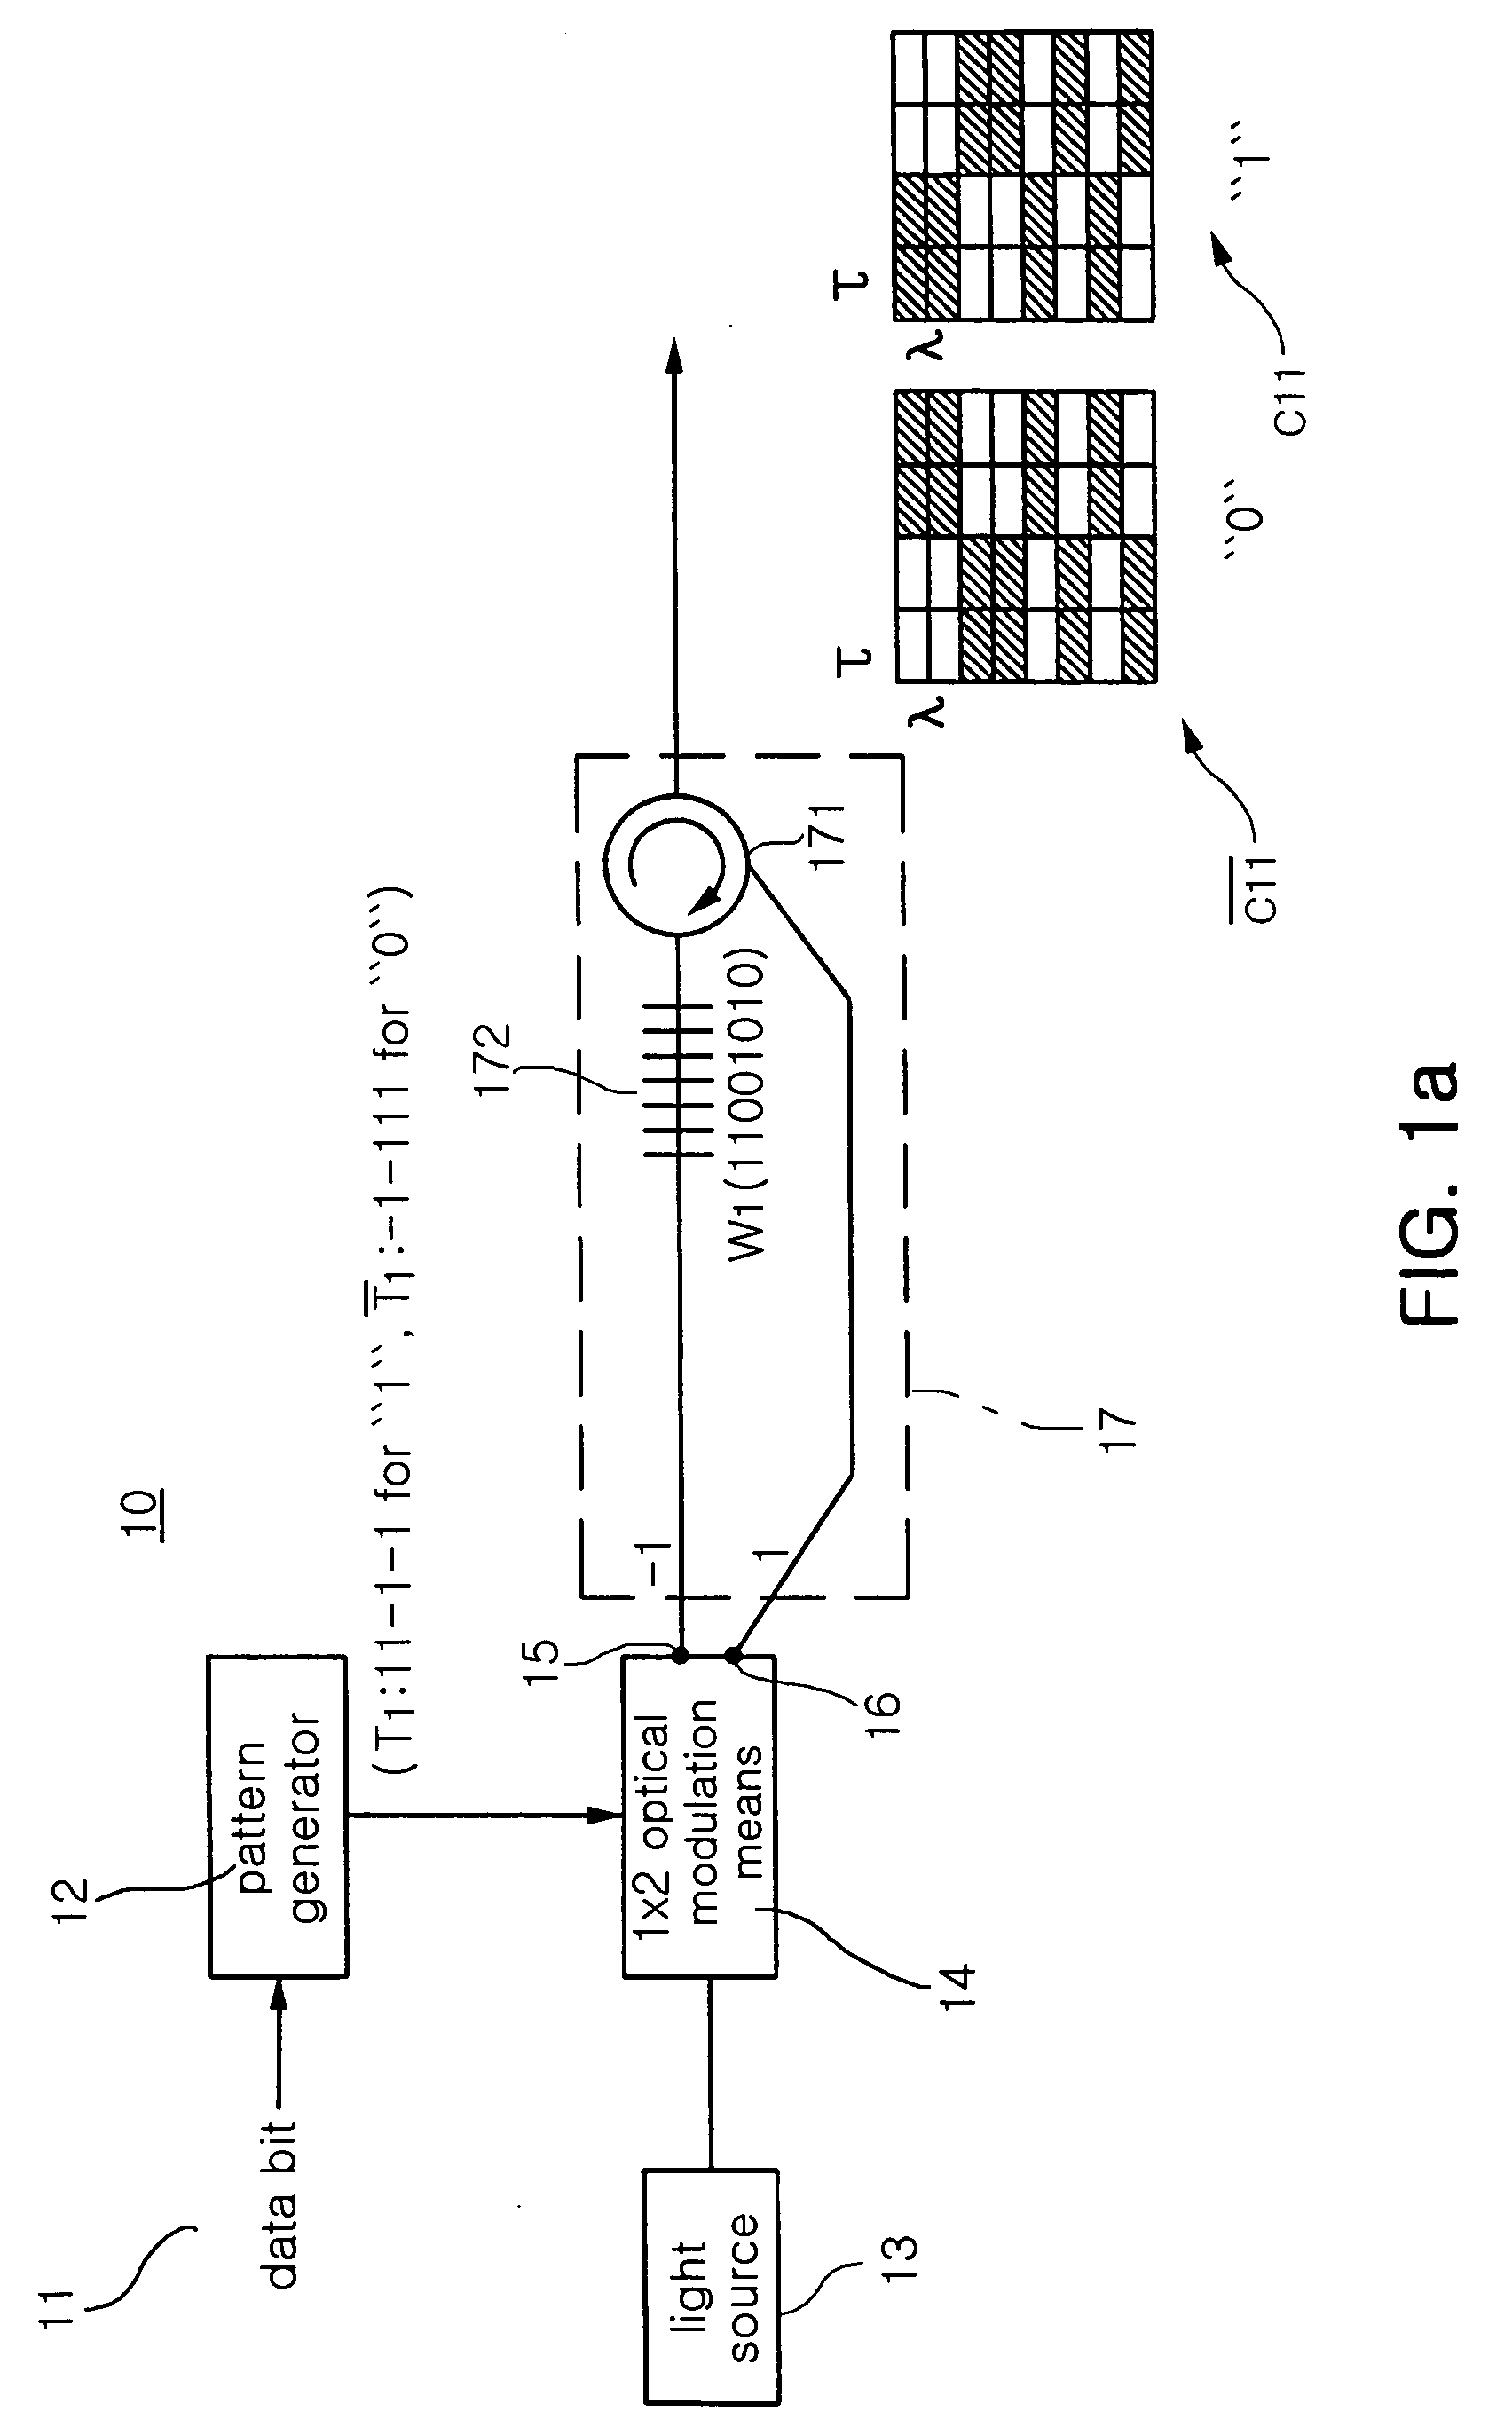 Two-dimensional optical CDMA system, PN coded wavelength/time encoder and decoder therein, and method of encoding/decoding